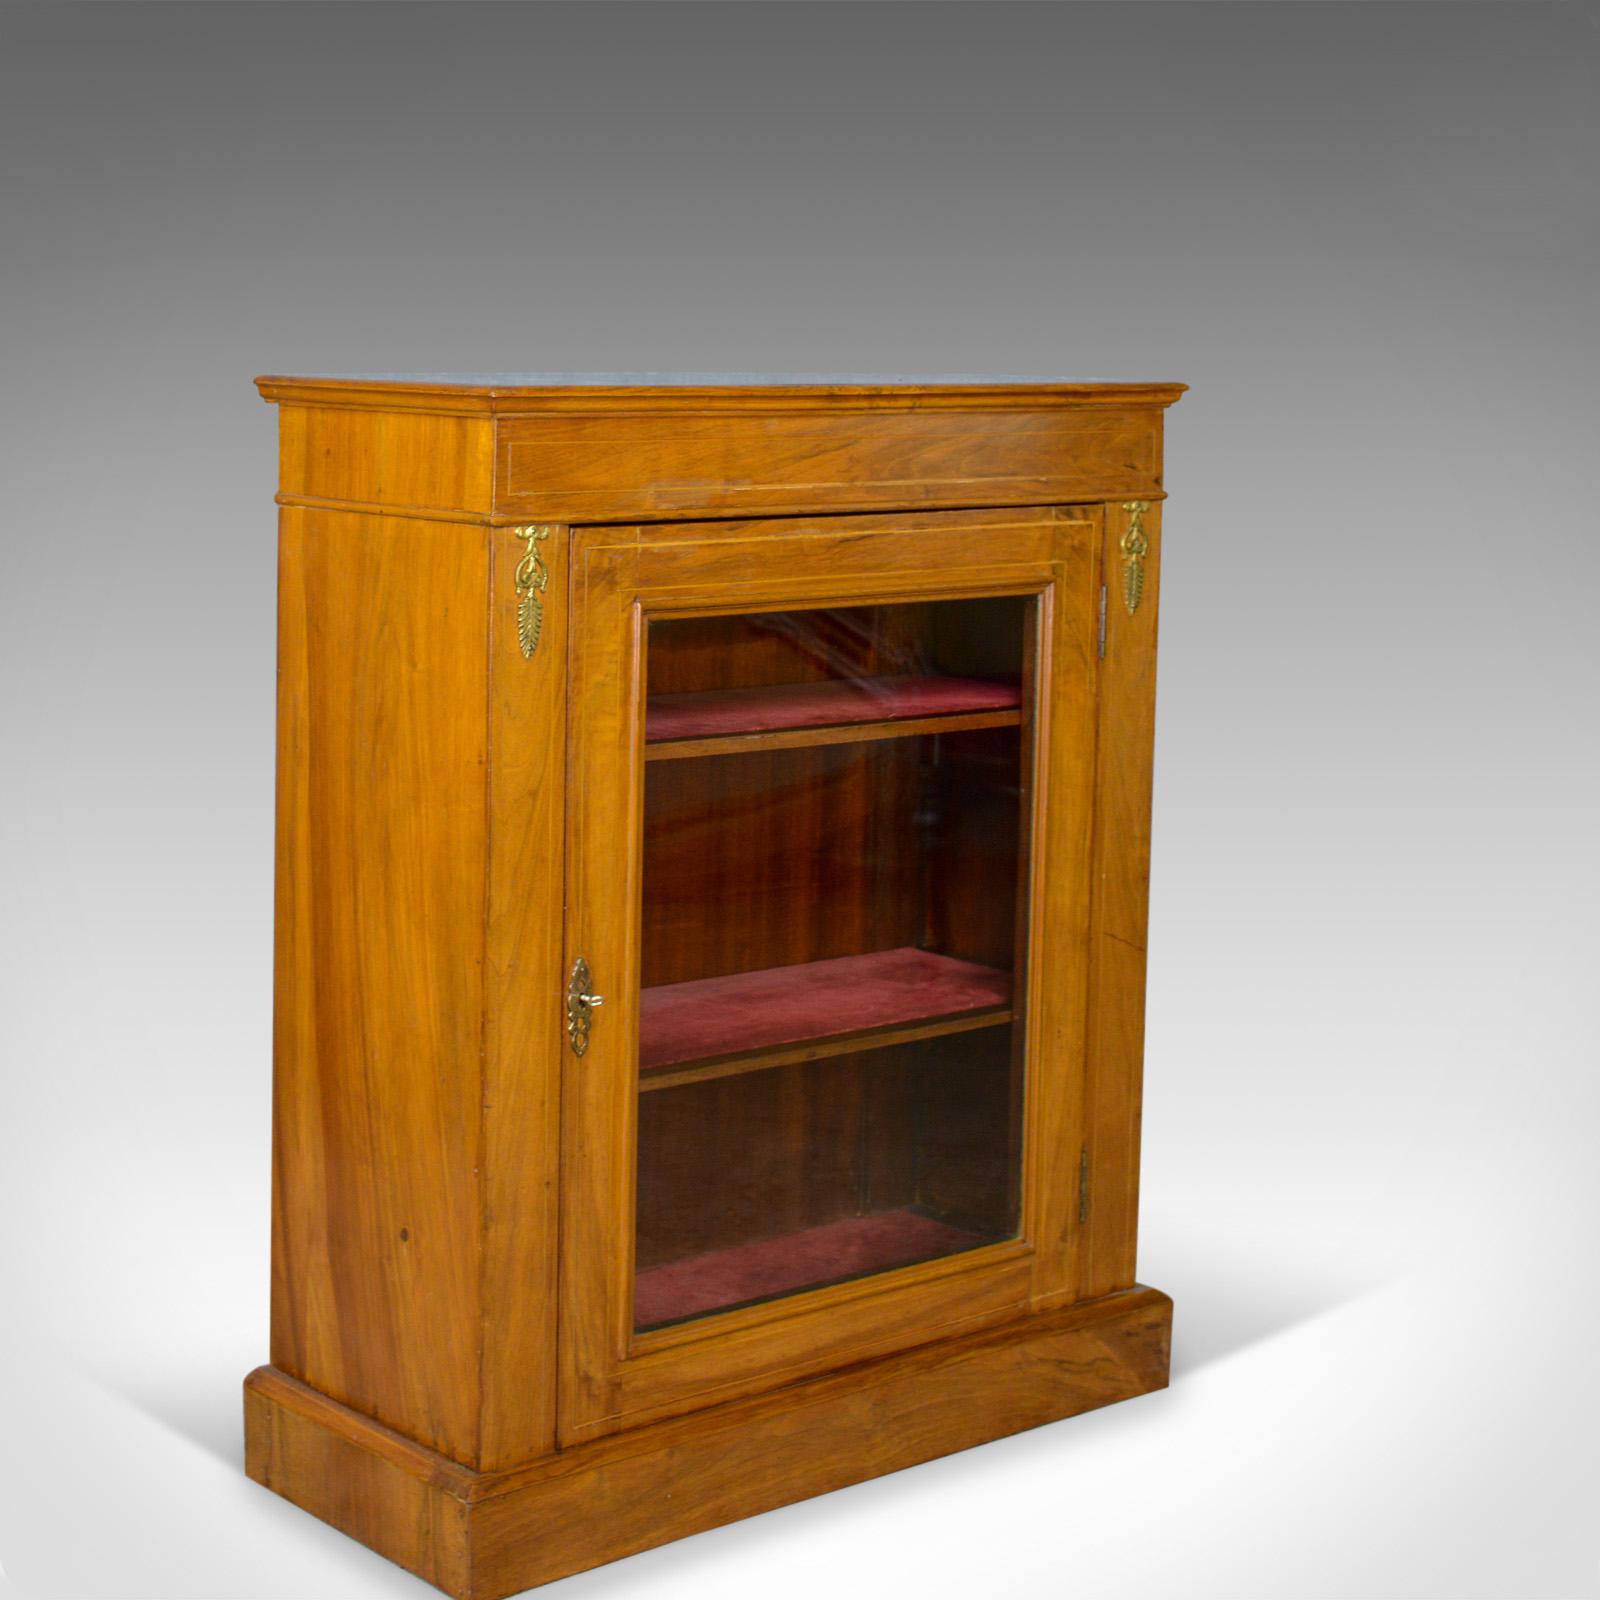 This is a pair of antique pier cabinets, English, Walnut, Edwardian, Regency Revival display cabinets dating to the early 20th century, circa 1910.

Attractive honey hues to the select English walnut
Well figured grain interest in a wax polished